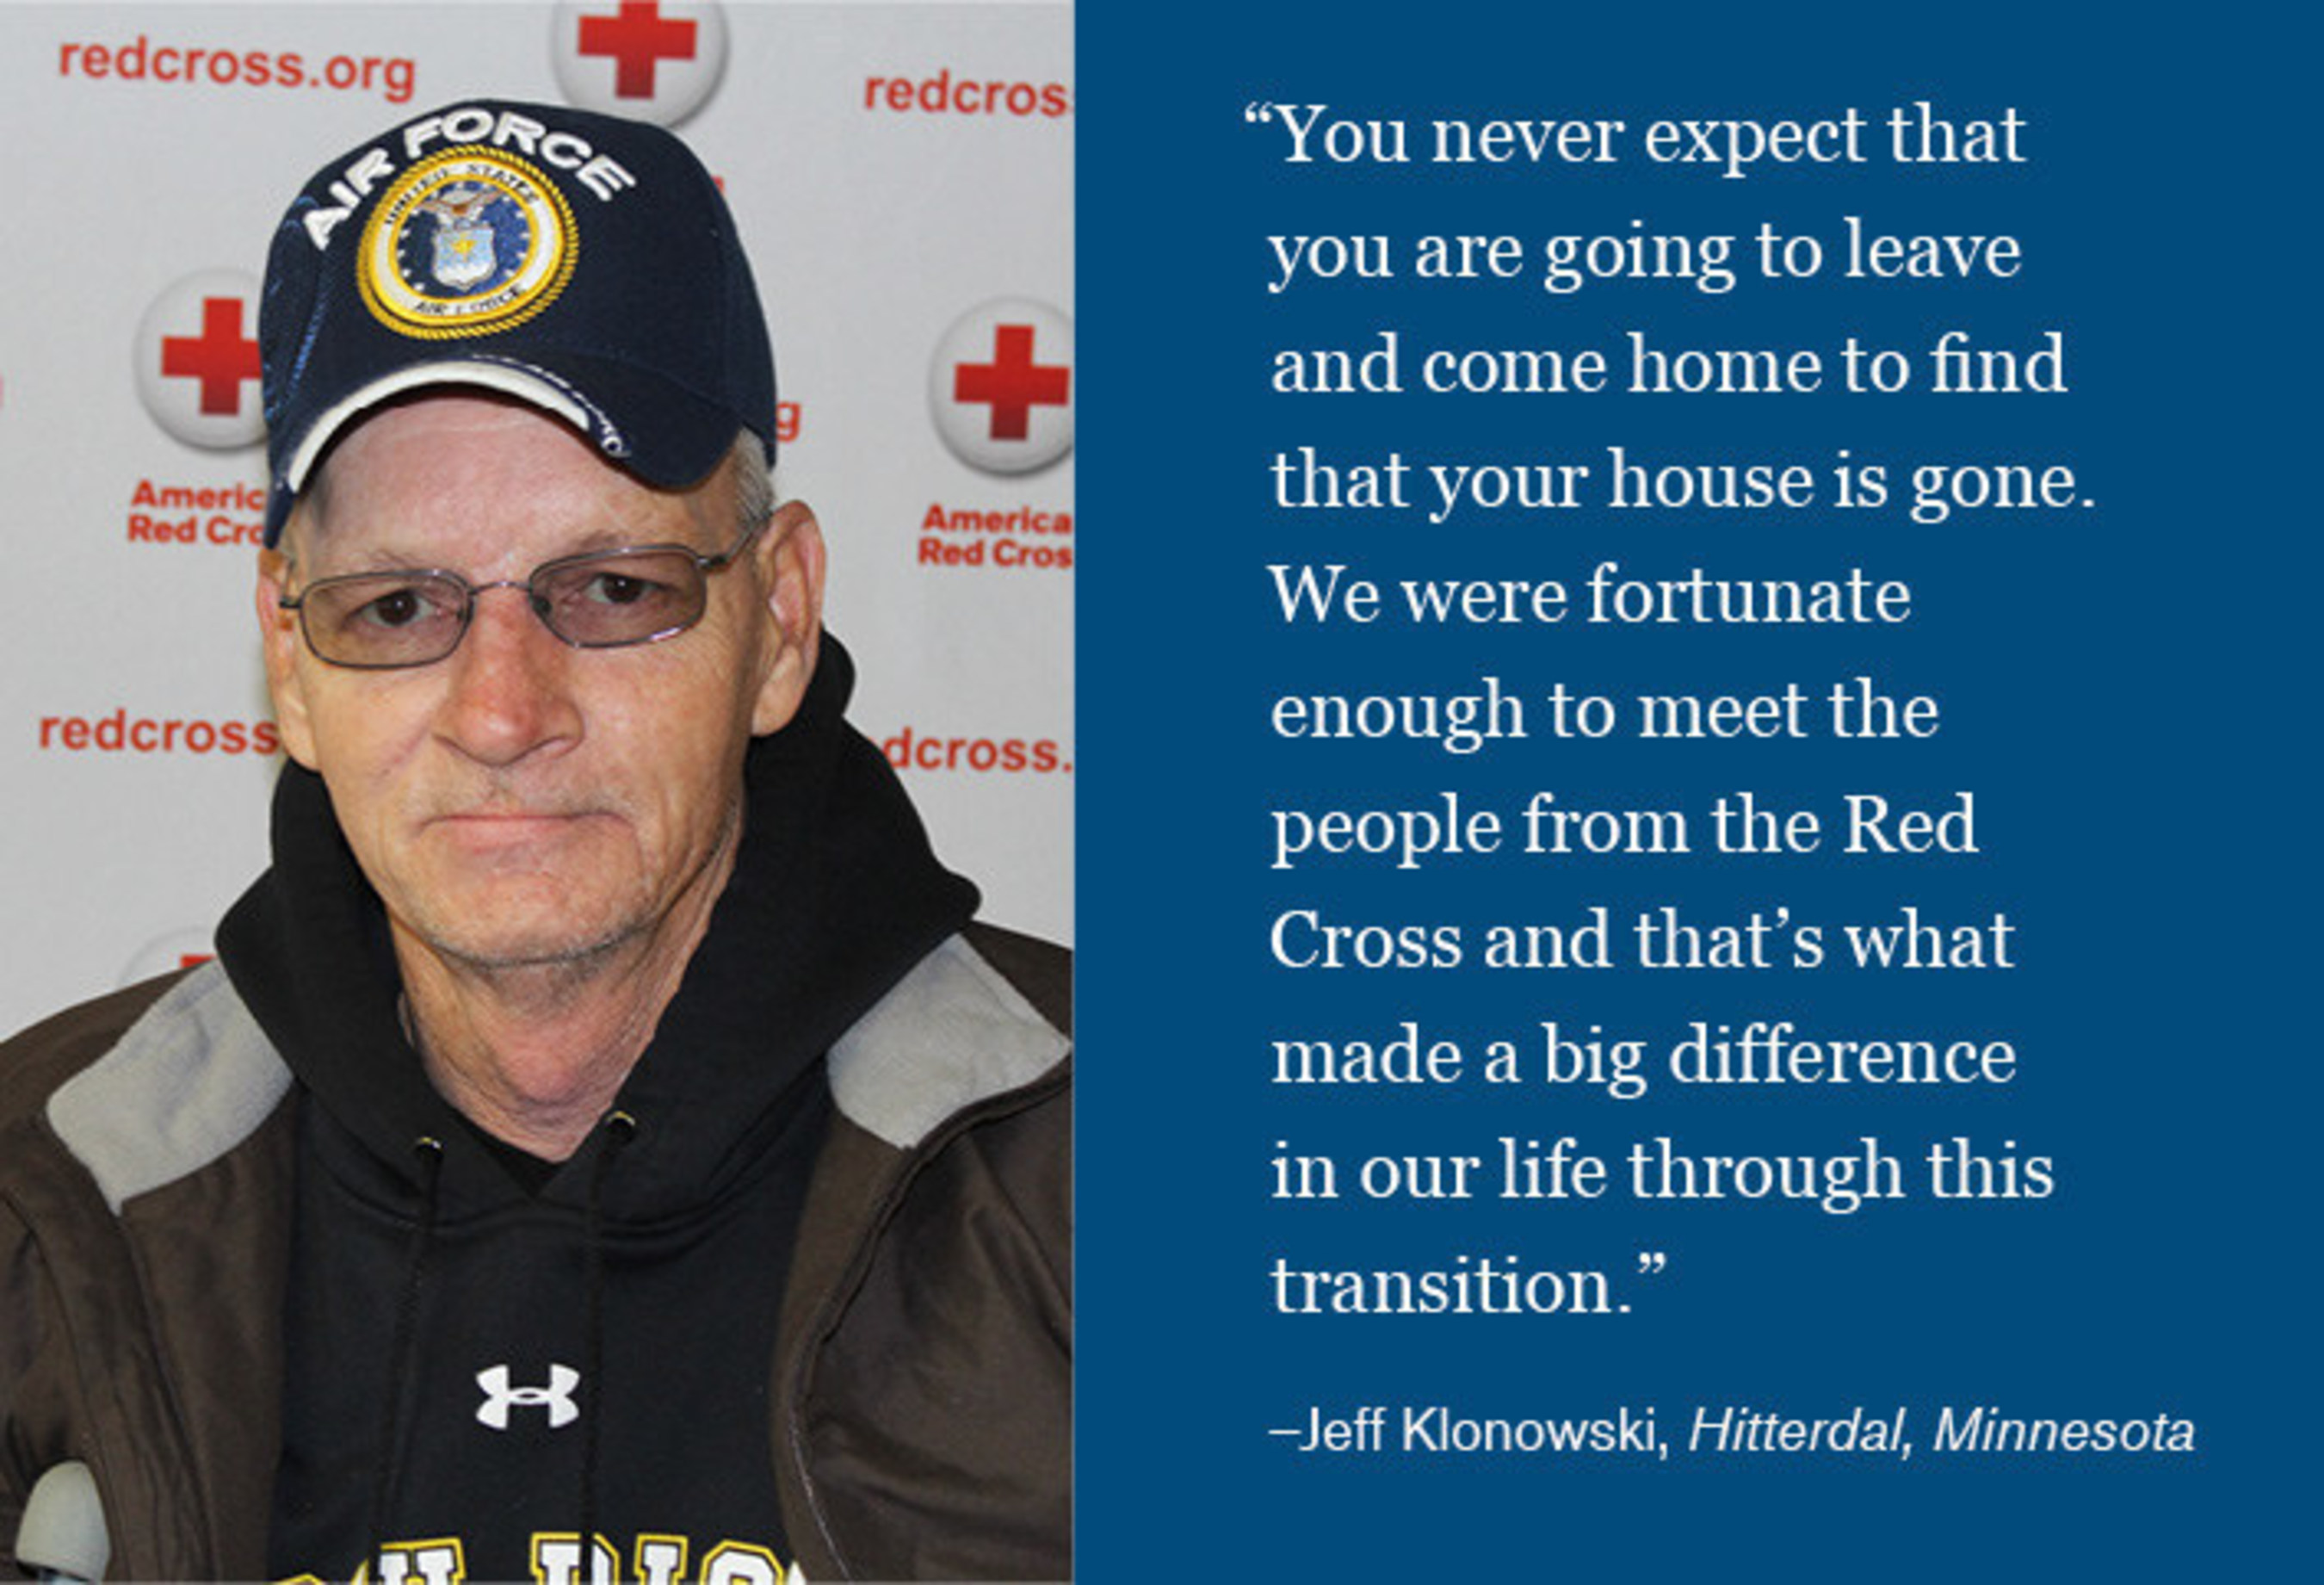 Jeff Klonowski of Hitterdal, Minn., family was helped by the American Red Cross after a fire decimated his home.